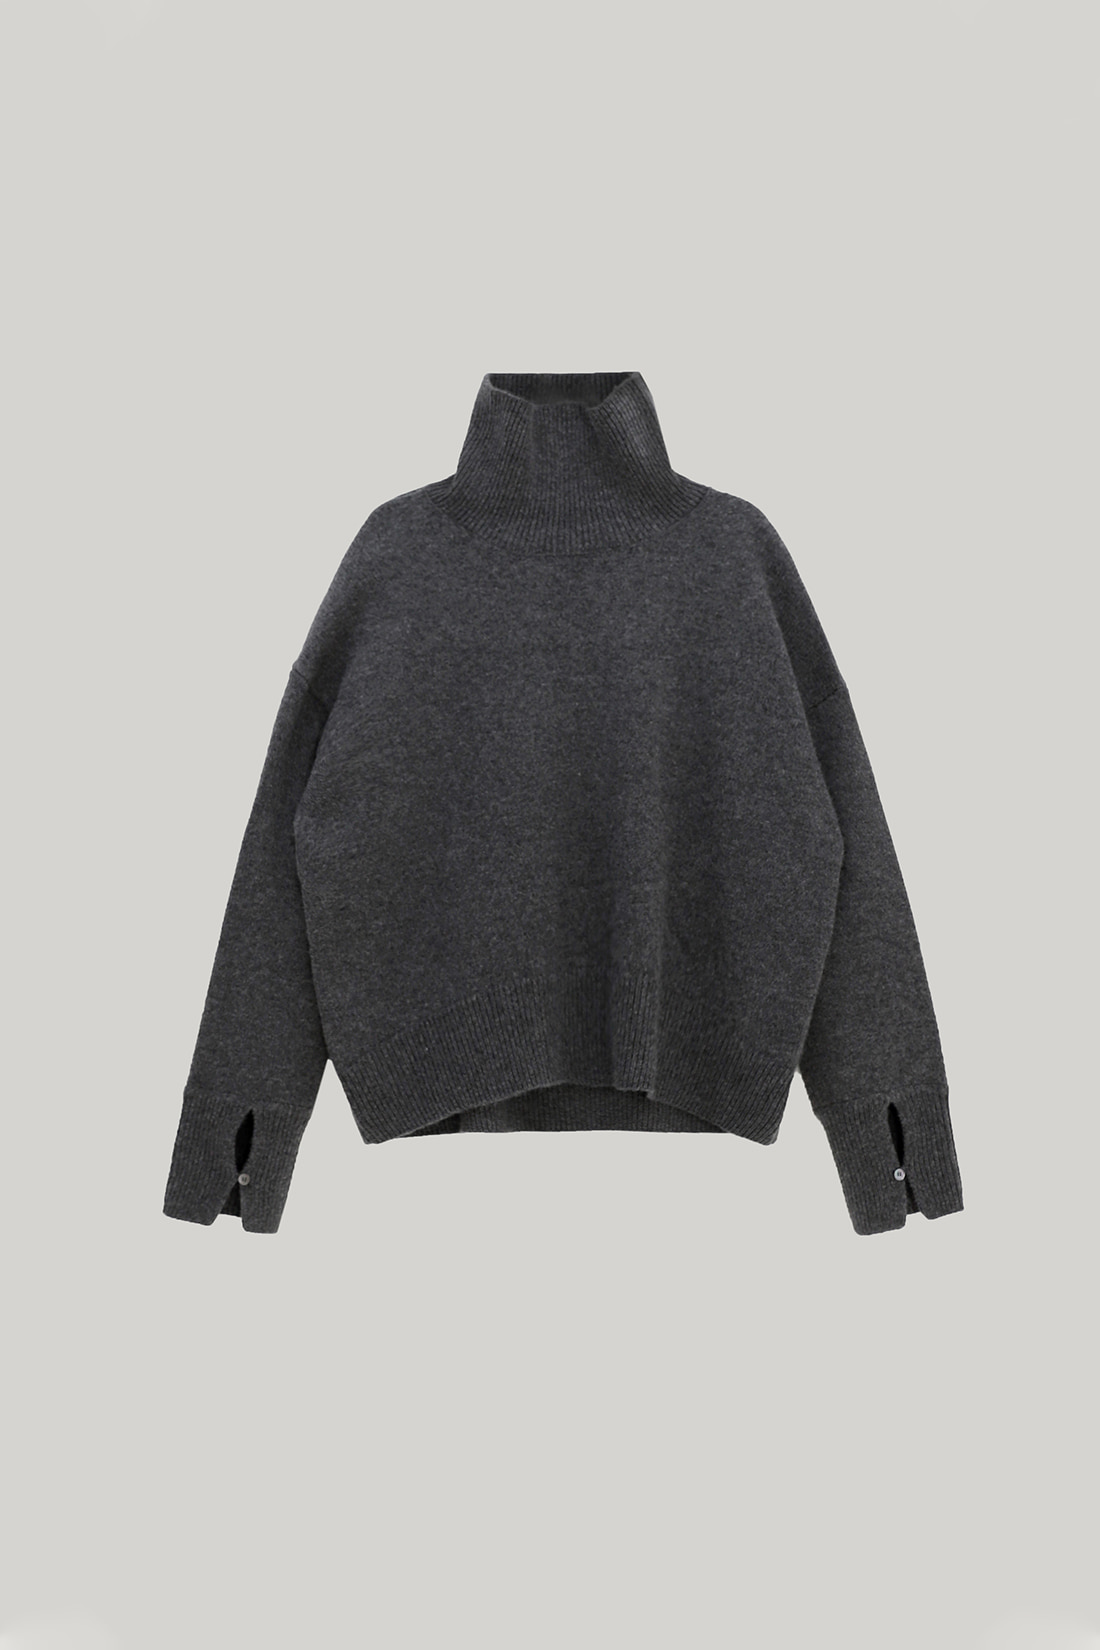 Becky Cashmere 100% High-neck Sweater (Charcoal)